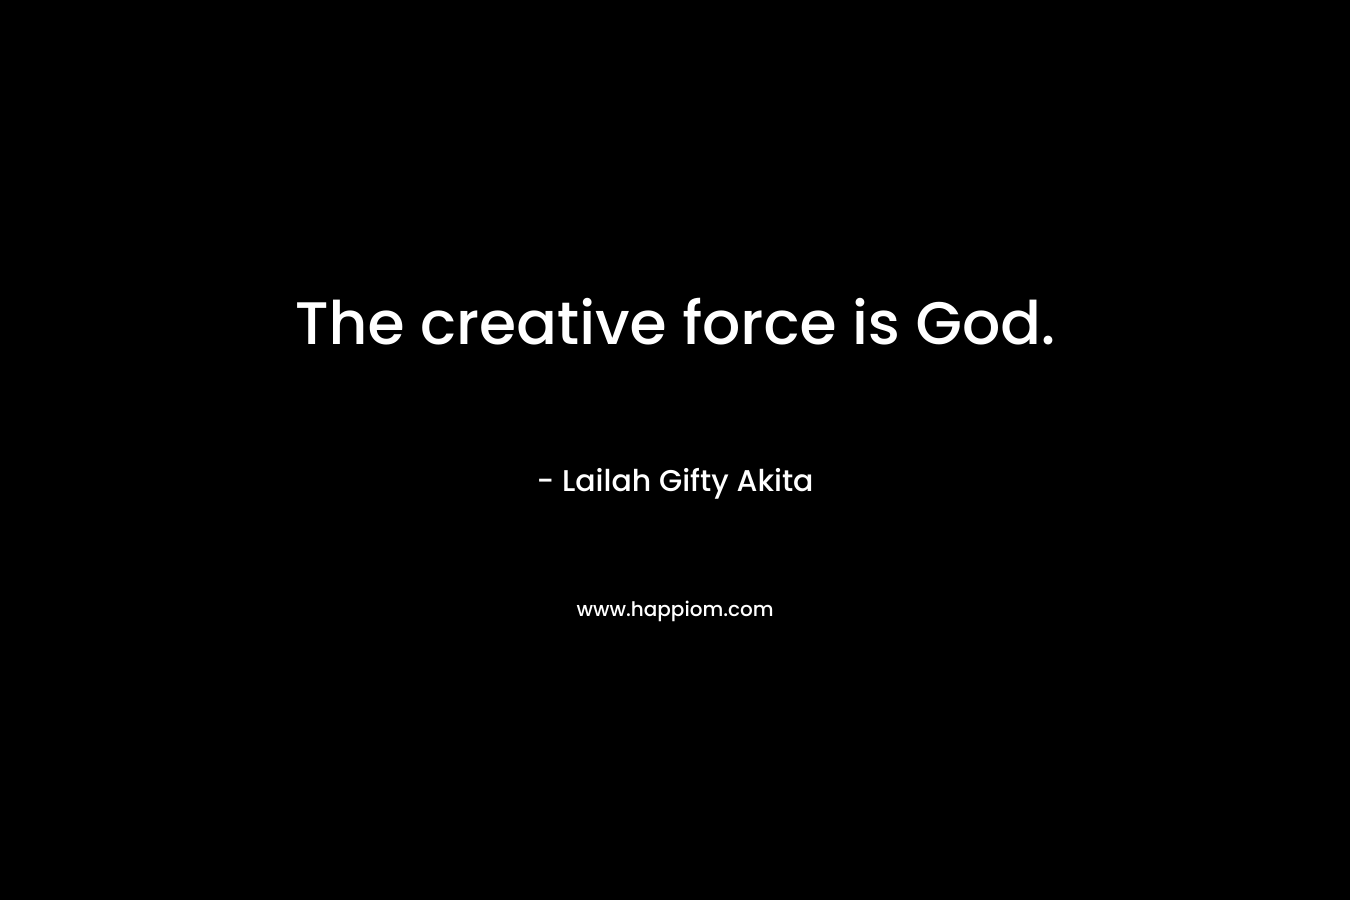 The creative force is God.